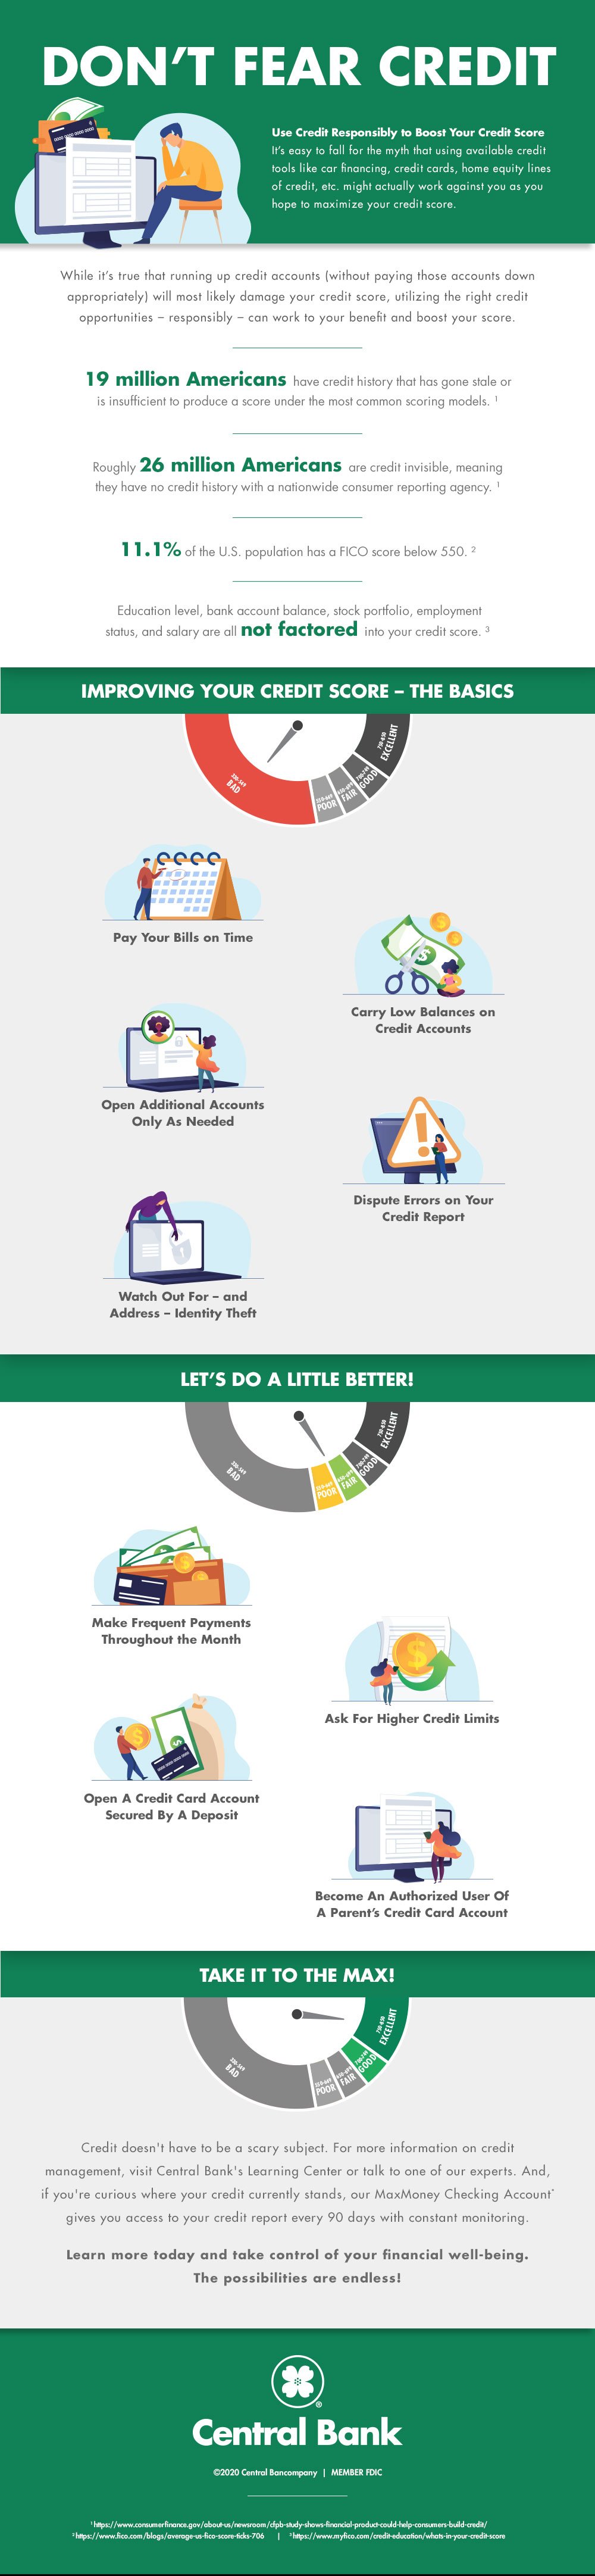 don't fear credit infographic